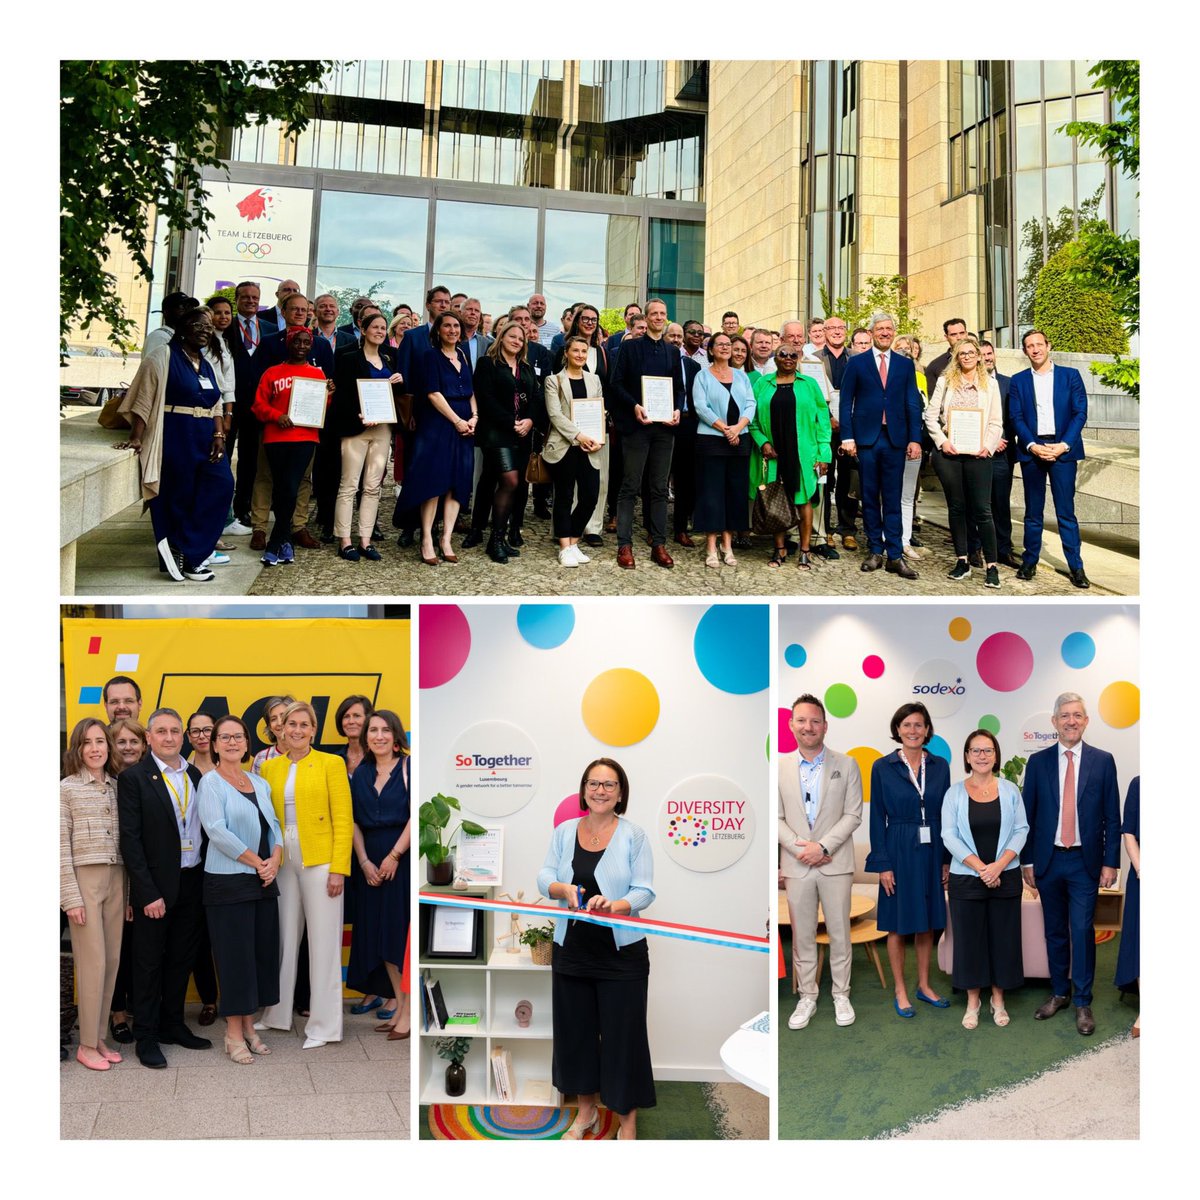 #Diversity is a strength! Diversity is our strength‼️ #DiversityDay2024 also marks the 10th anniversary of the Diversity Charter 🇱🇺 with many new signatories tonight. Thank you @BIL_LUX for hosting. I also had great exchanges at Sodexo & ACL about inclusion & best practices. 👍🏼👍🏼